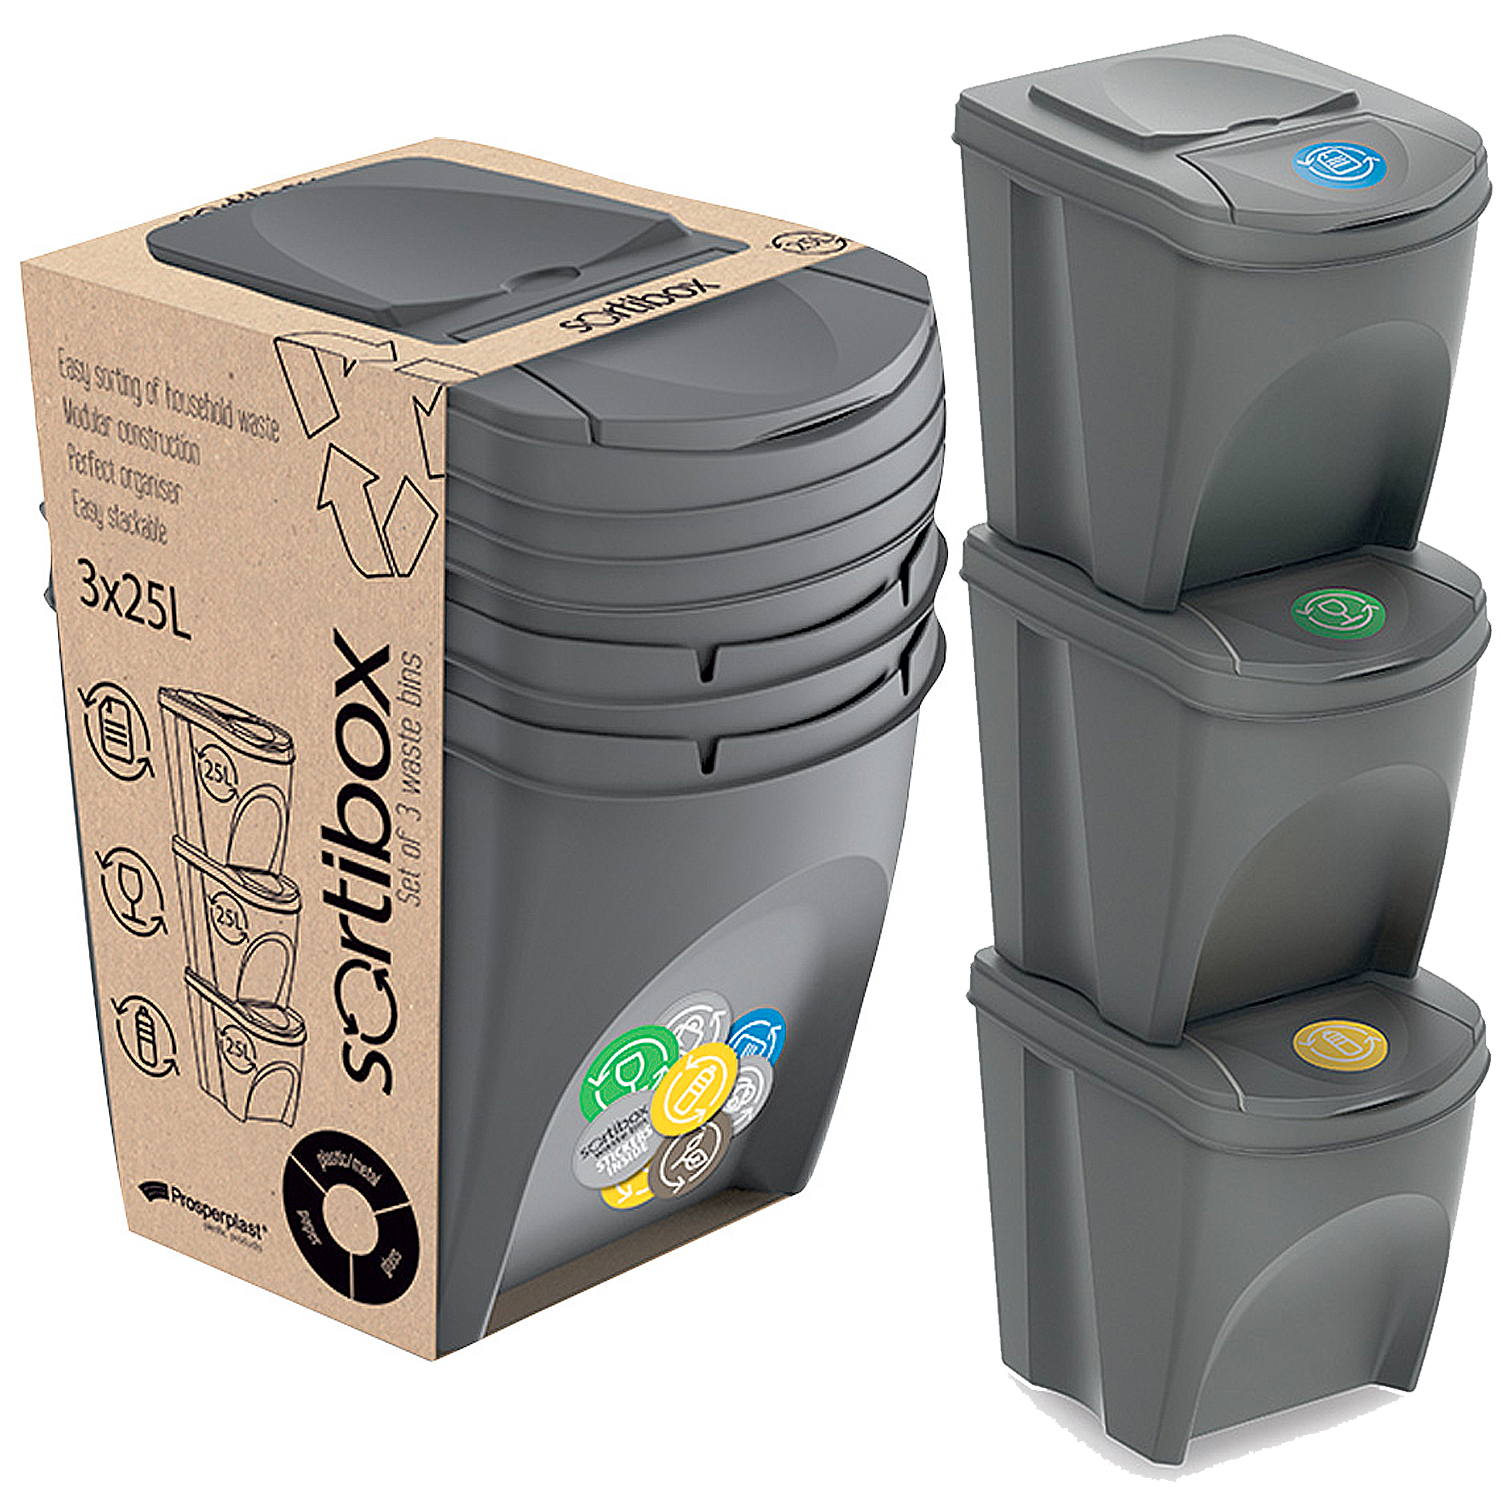 Set of 3 25 Litre Stackable Recycling Bins - WeeklyDeals4Less